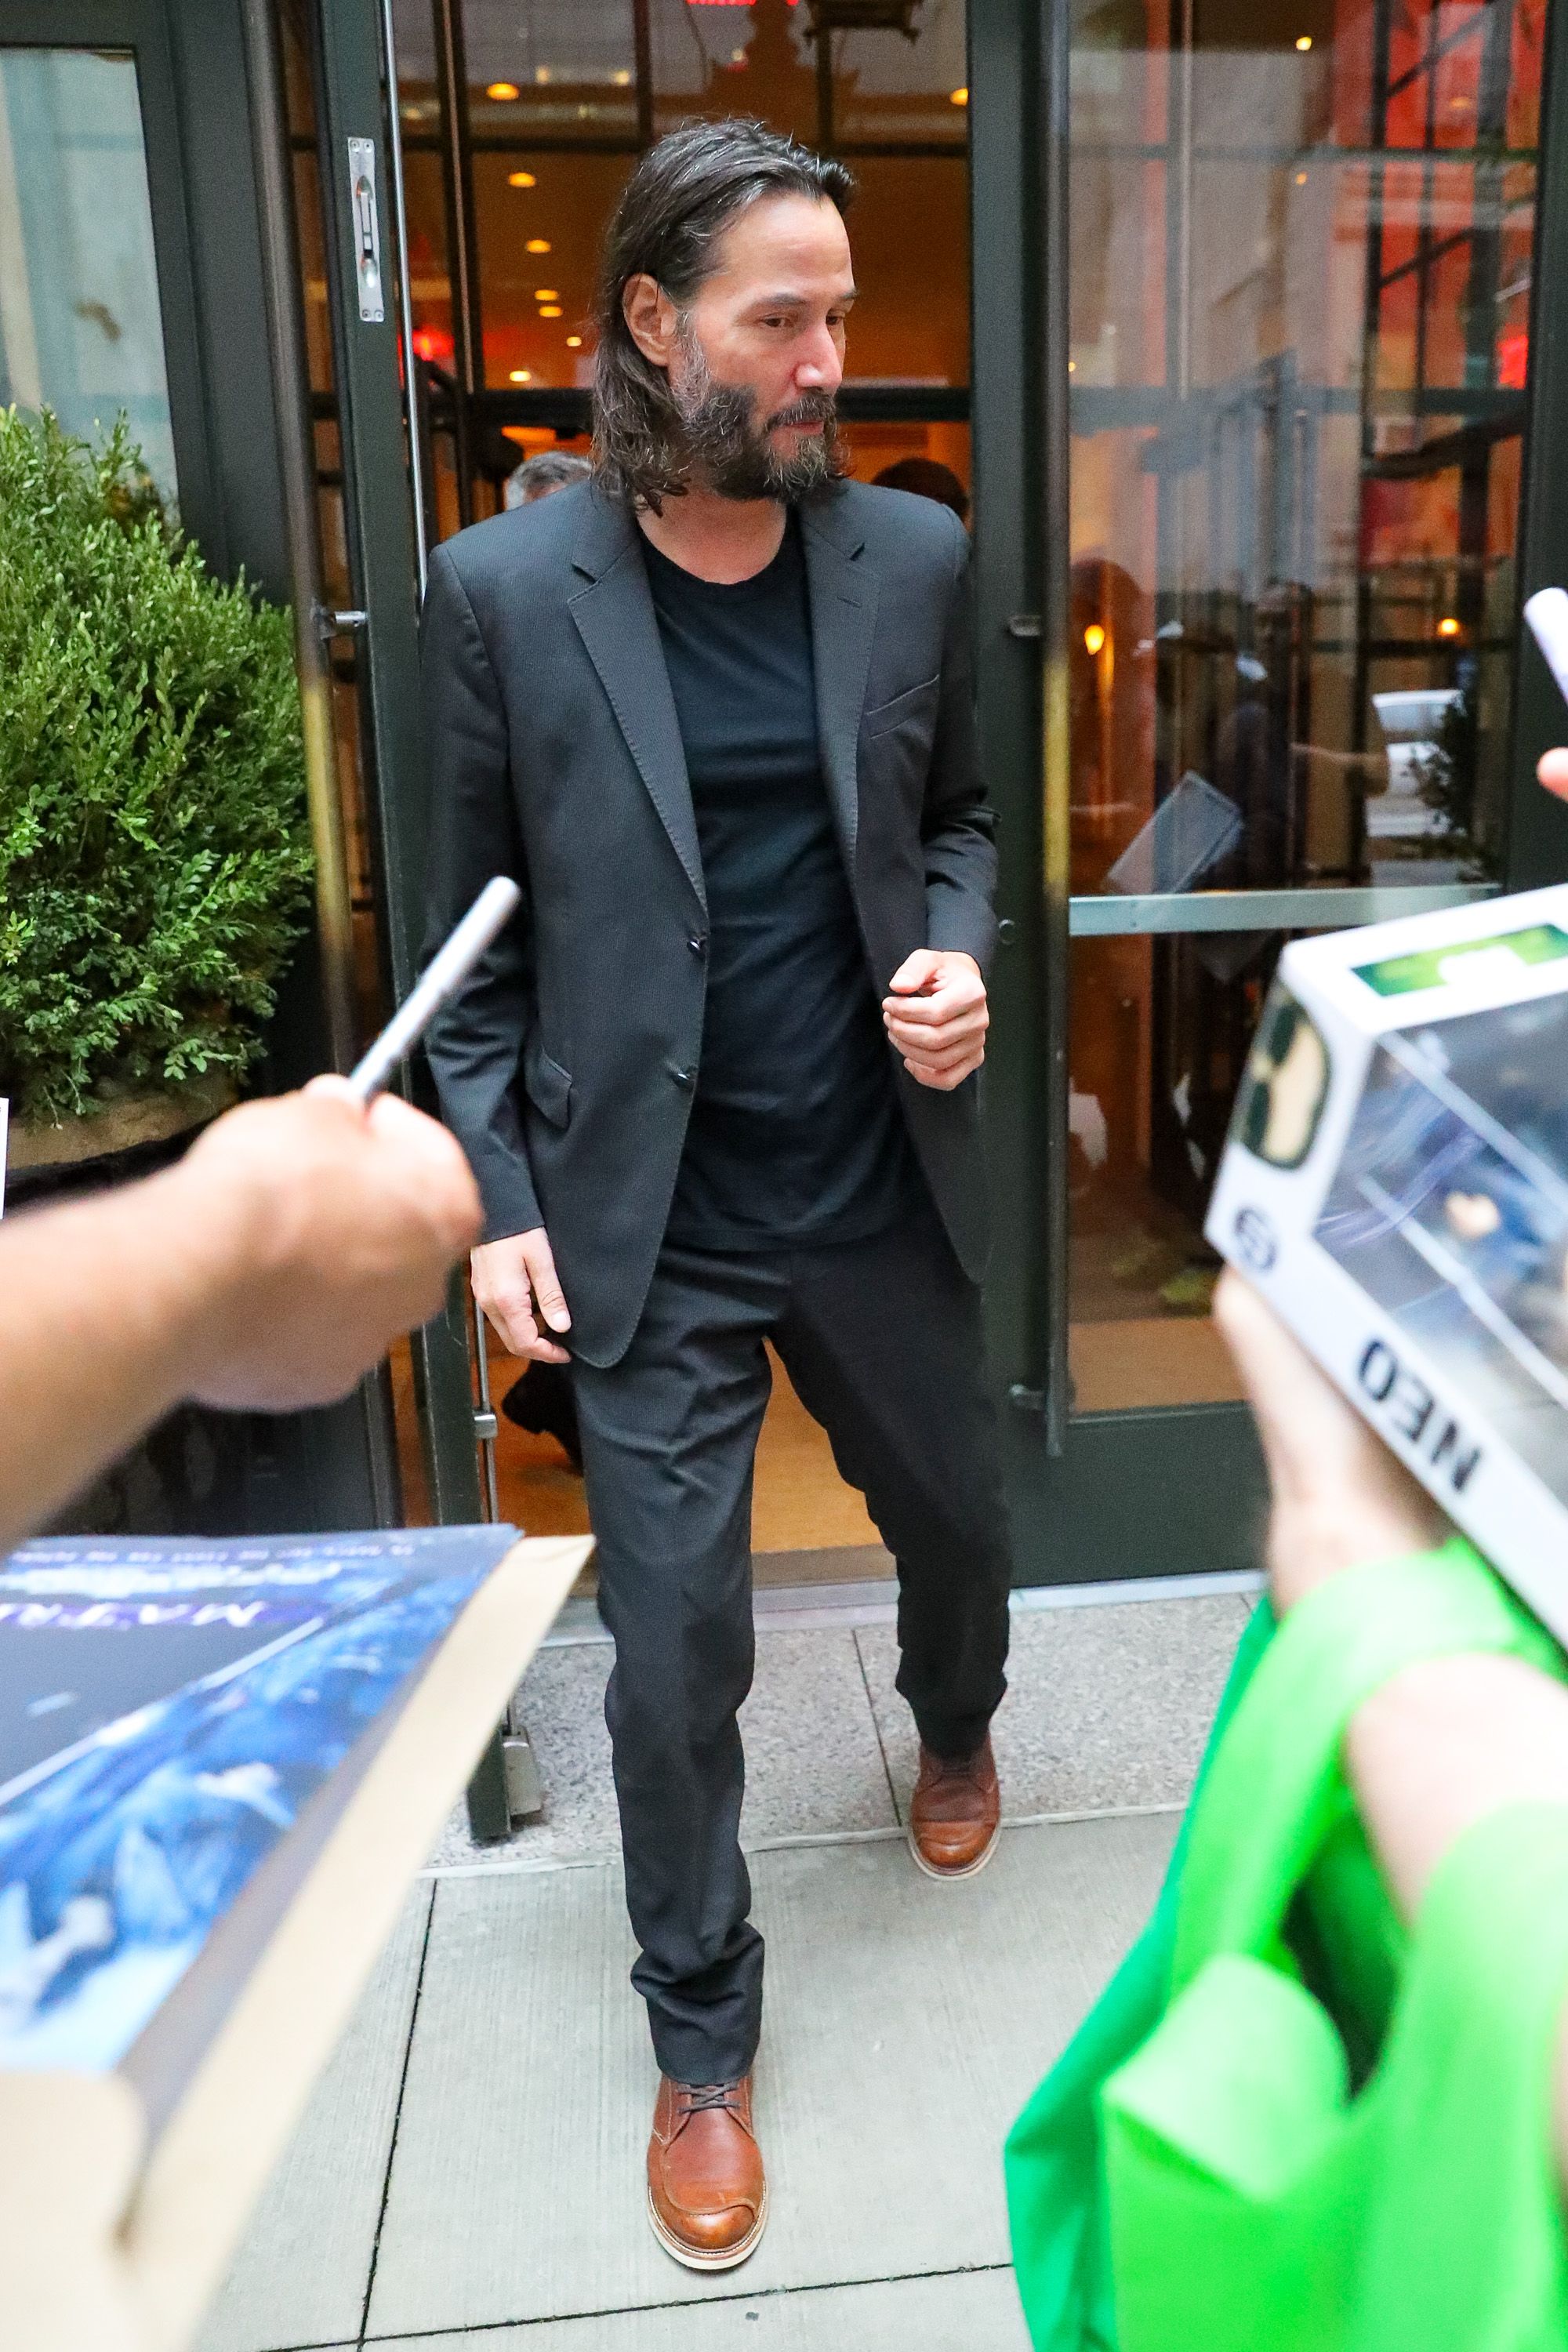 Keanu Reeves walks the streets on July 8, 2022, in New York, New York. | Source: Getty Images